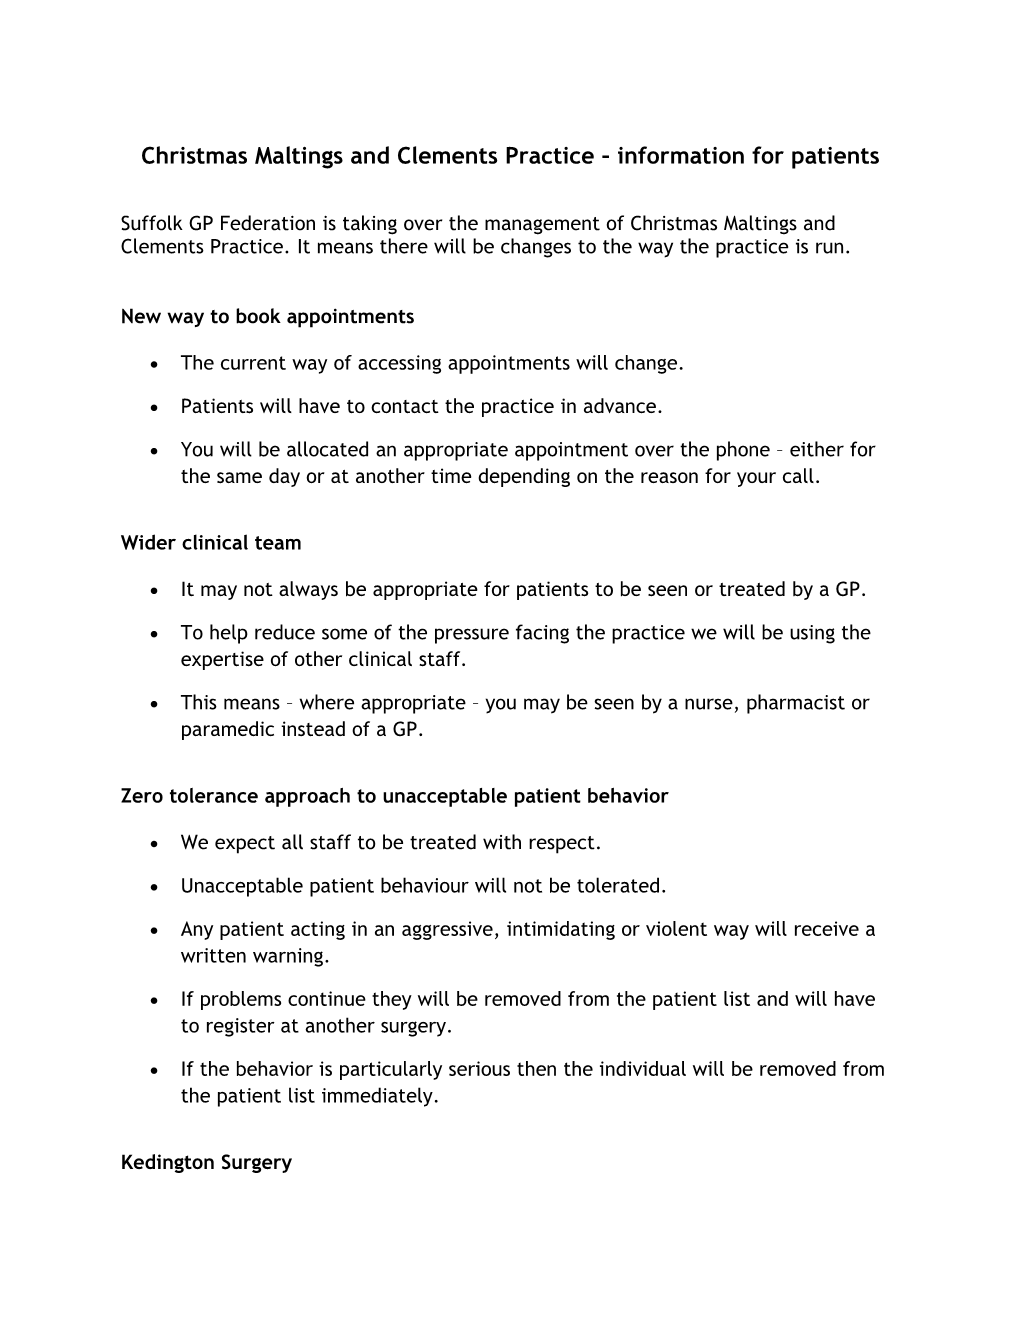 Christmas Maltings and Clements Practice Information for Patients